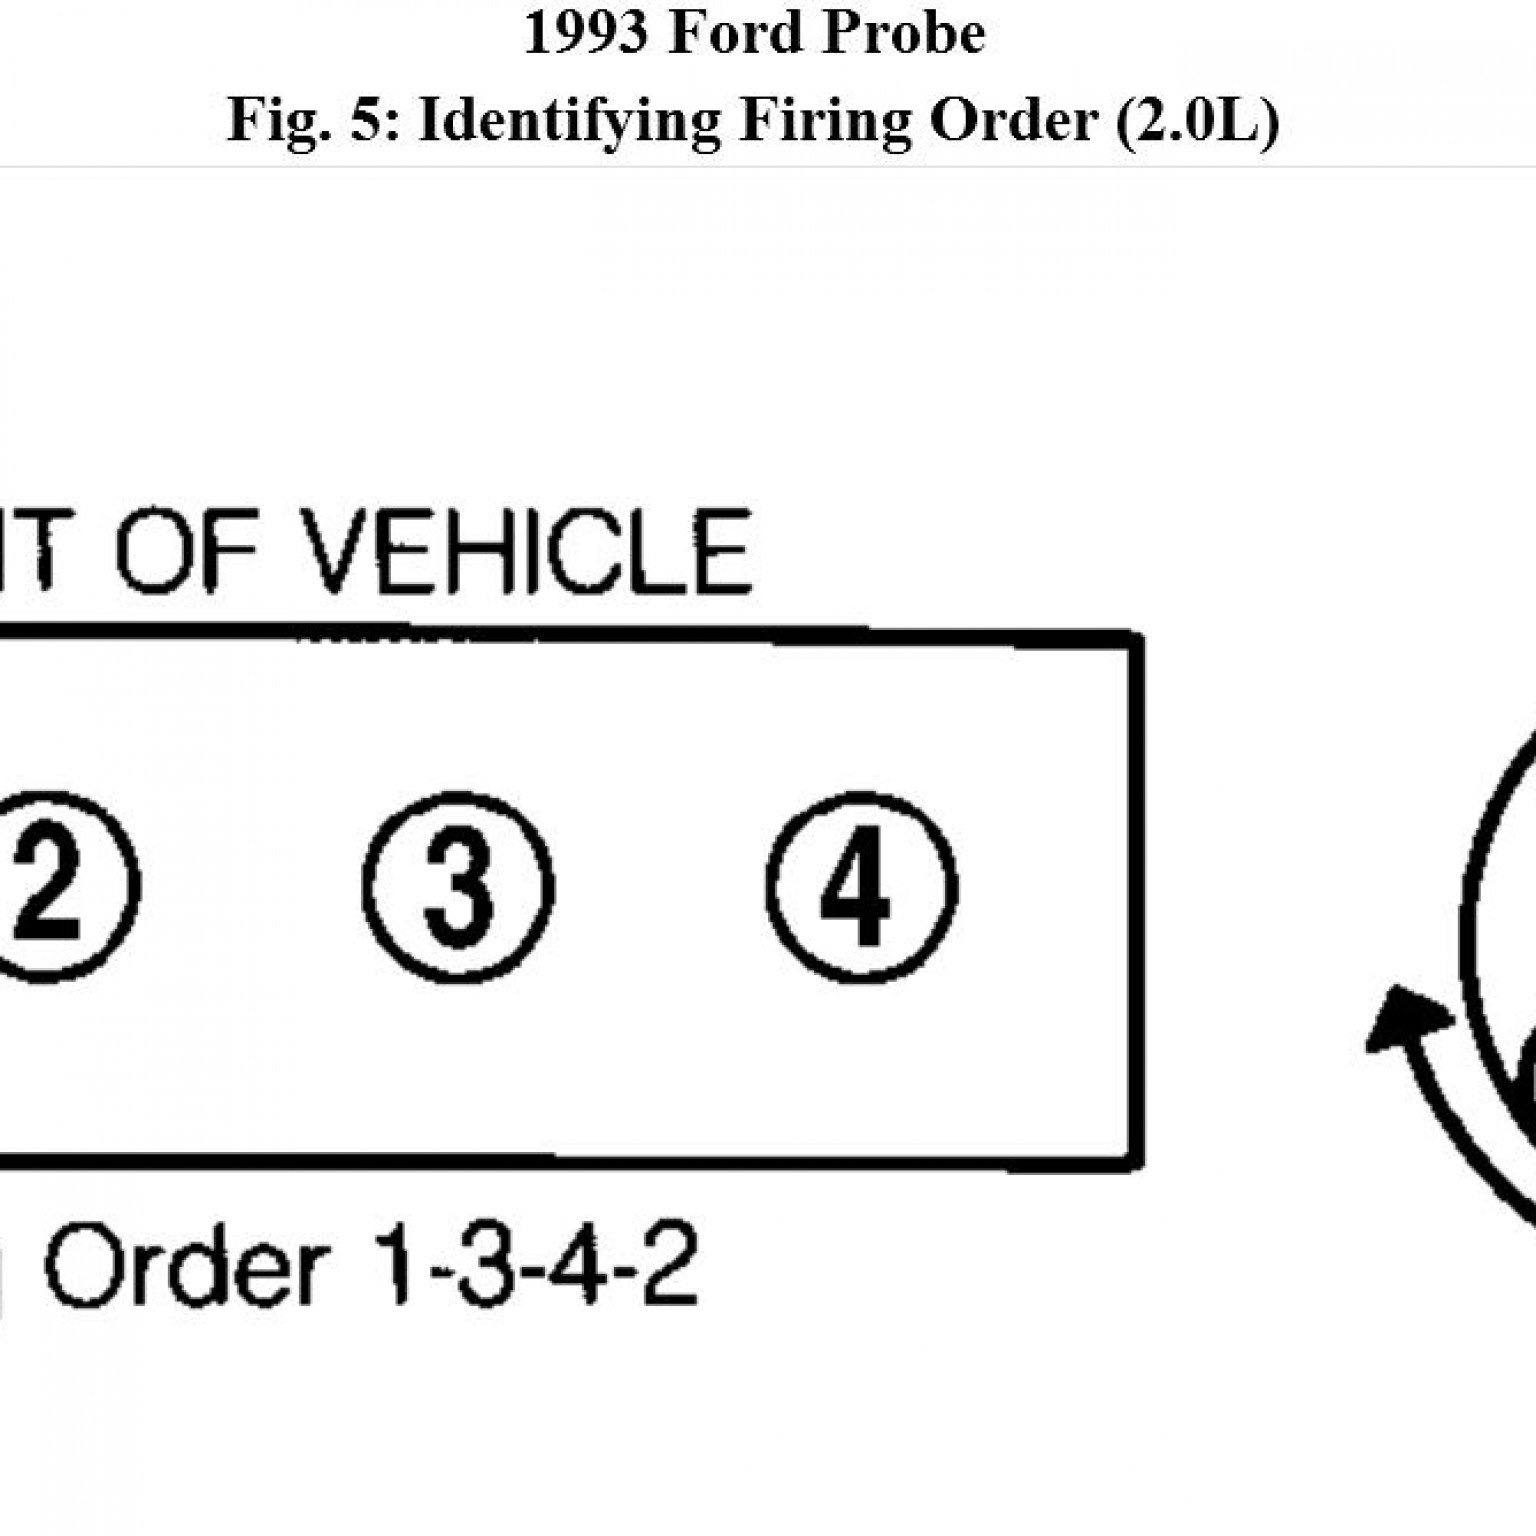 Ford Focus L Cyl Firing Order Ricks Free Auto Wiring And Printable